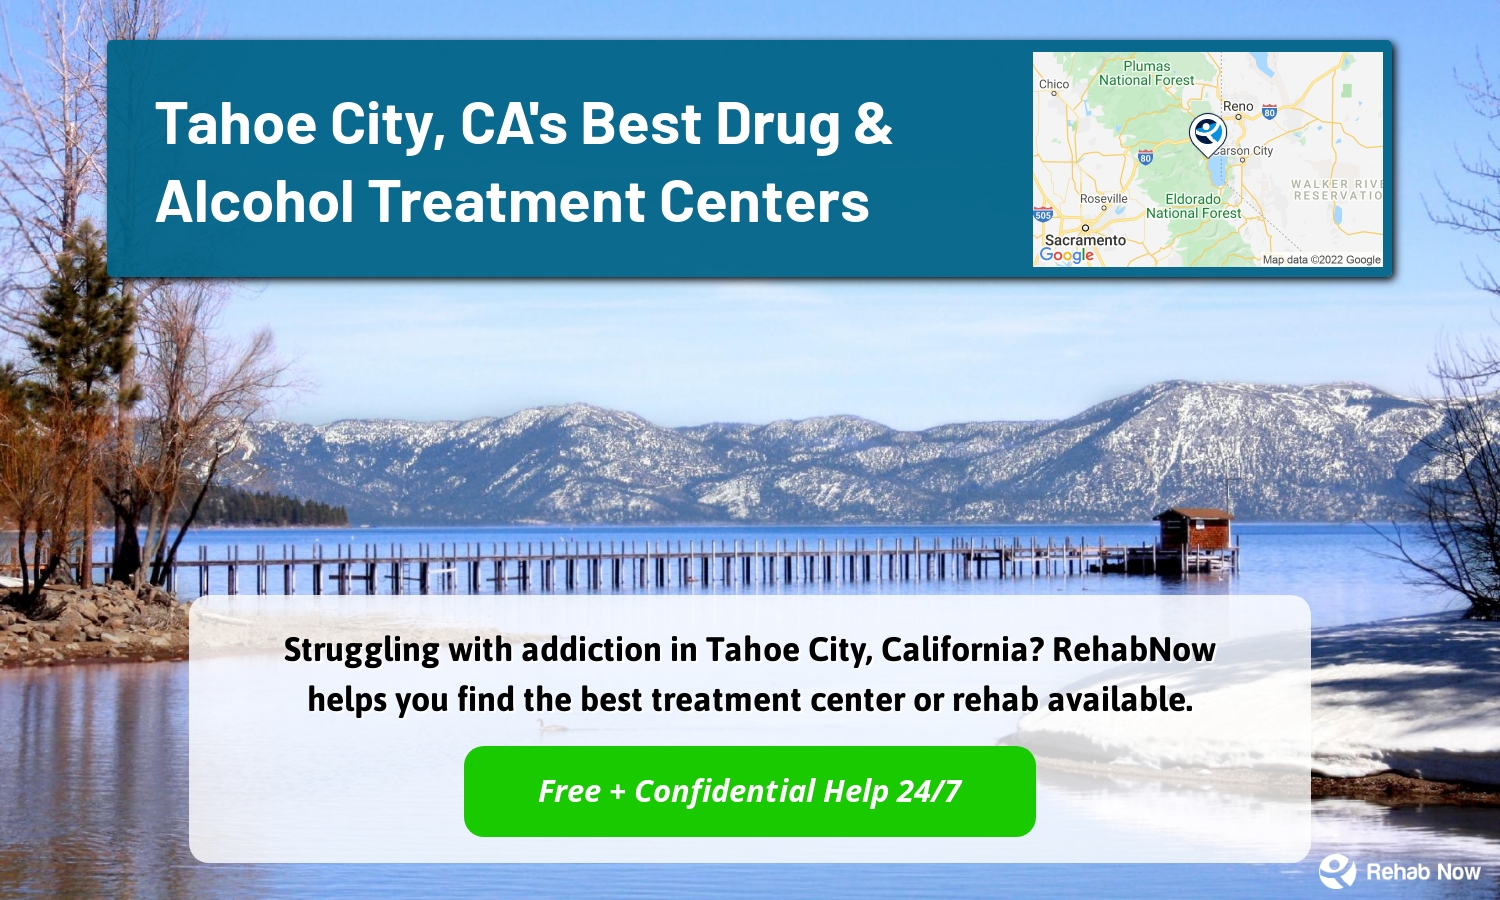 Struggling with addiction in Tahoe City, California? RehabNow helps you find the best treatment center or rehab available.